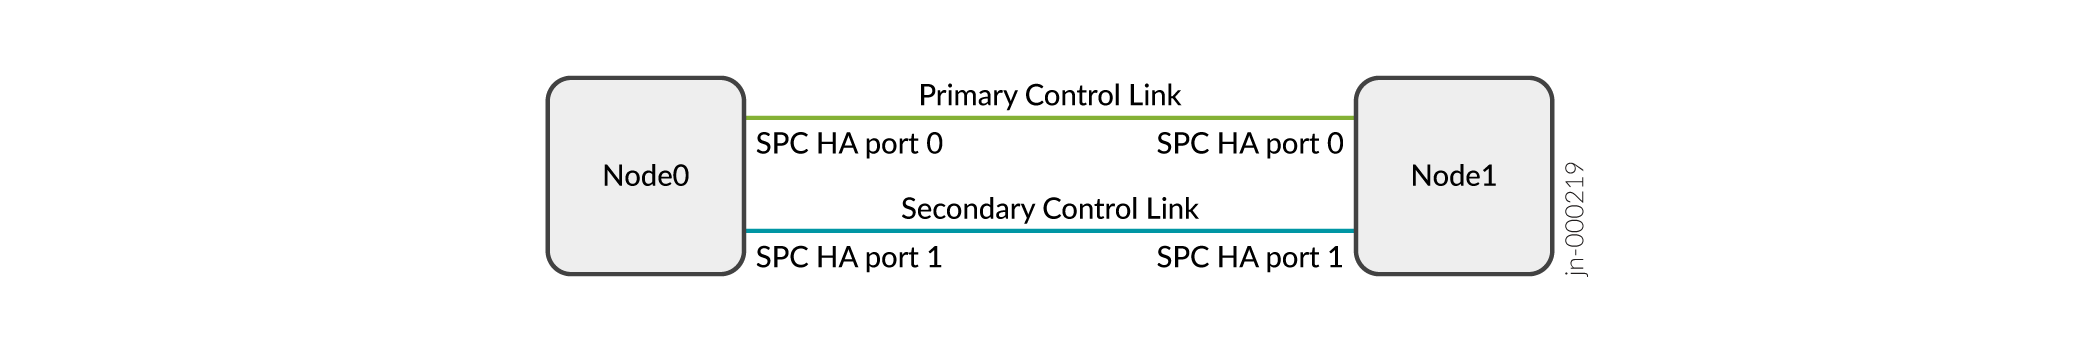 Control Links Transition Stages